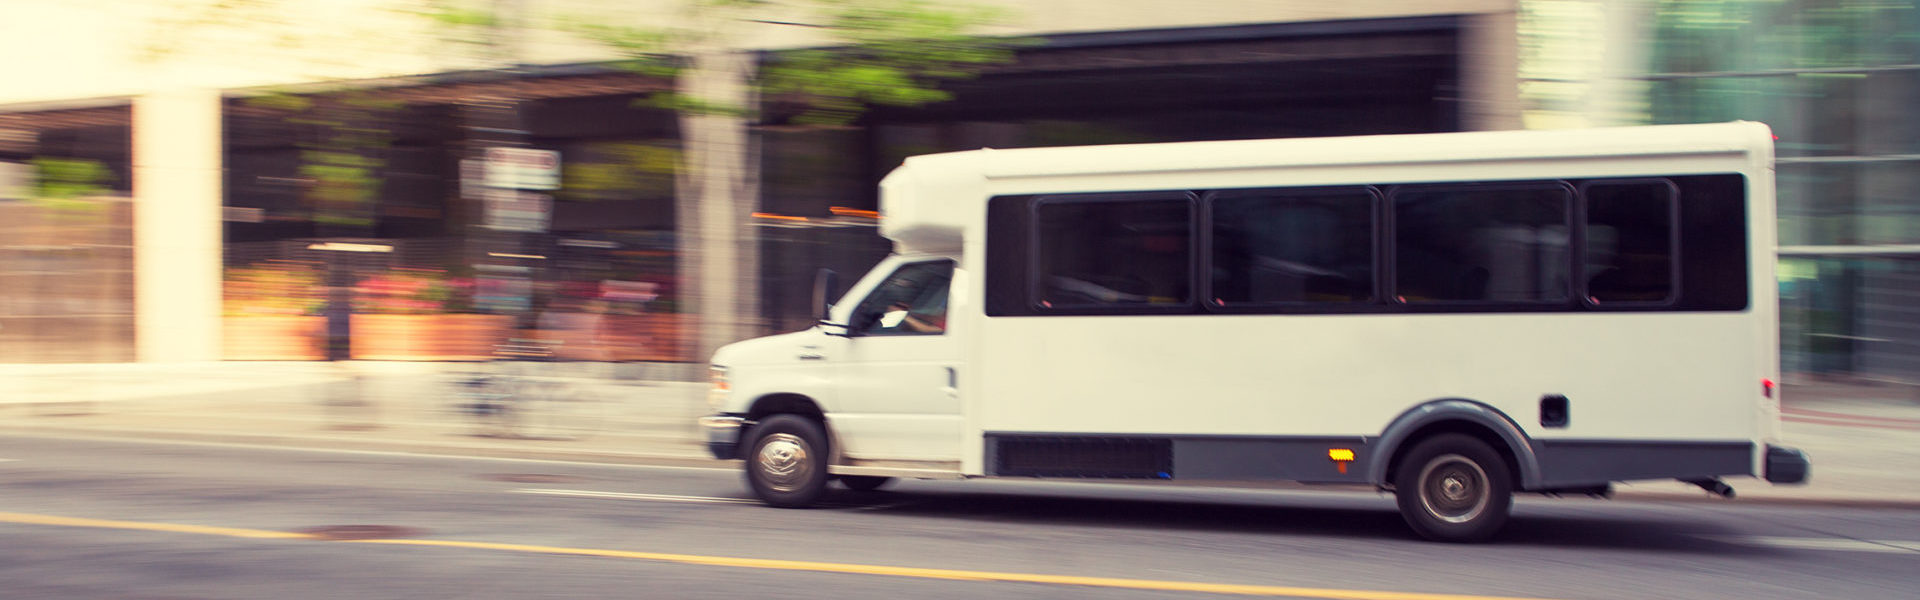 Livery insurance shuttle header, a shuttle bus driving on a city street with motion blur background.